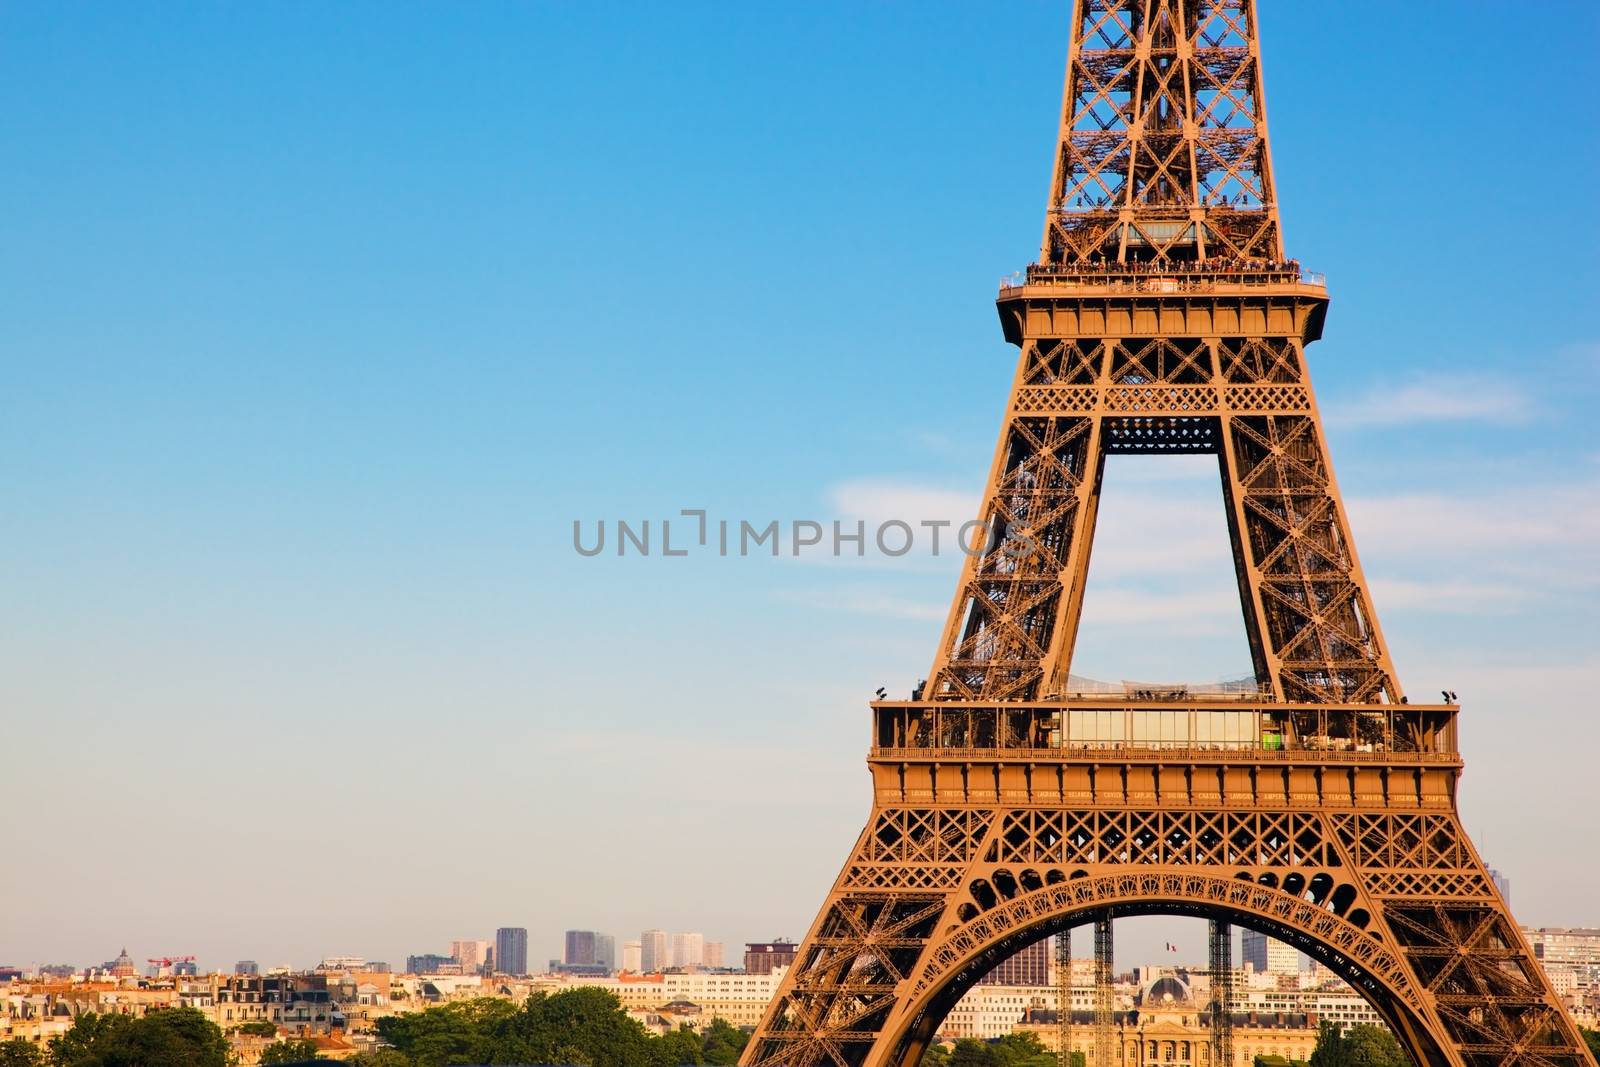 Eiffel Tower middle section, the city in the background, Paris, France